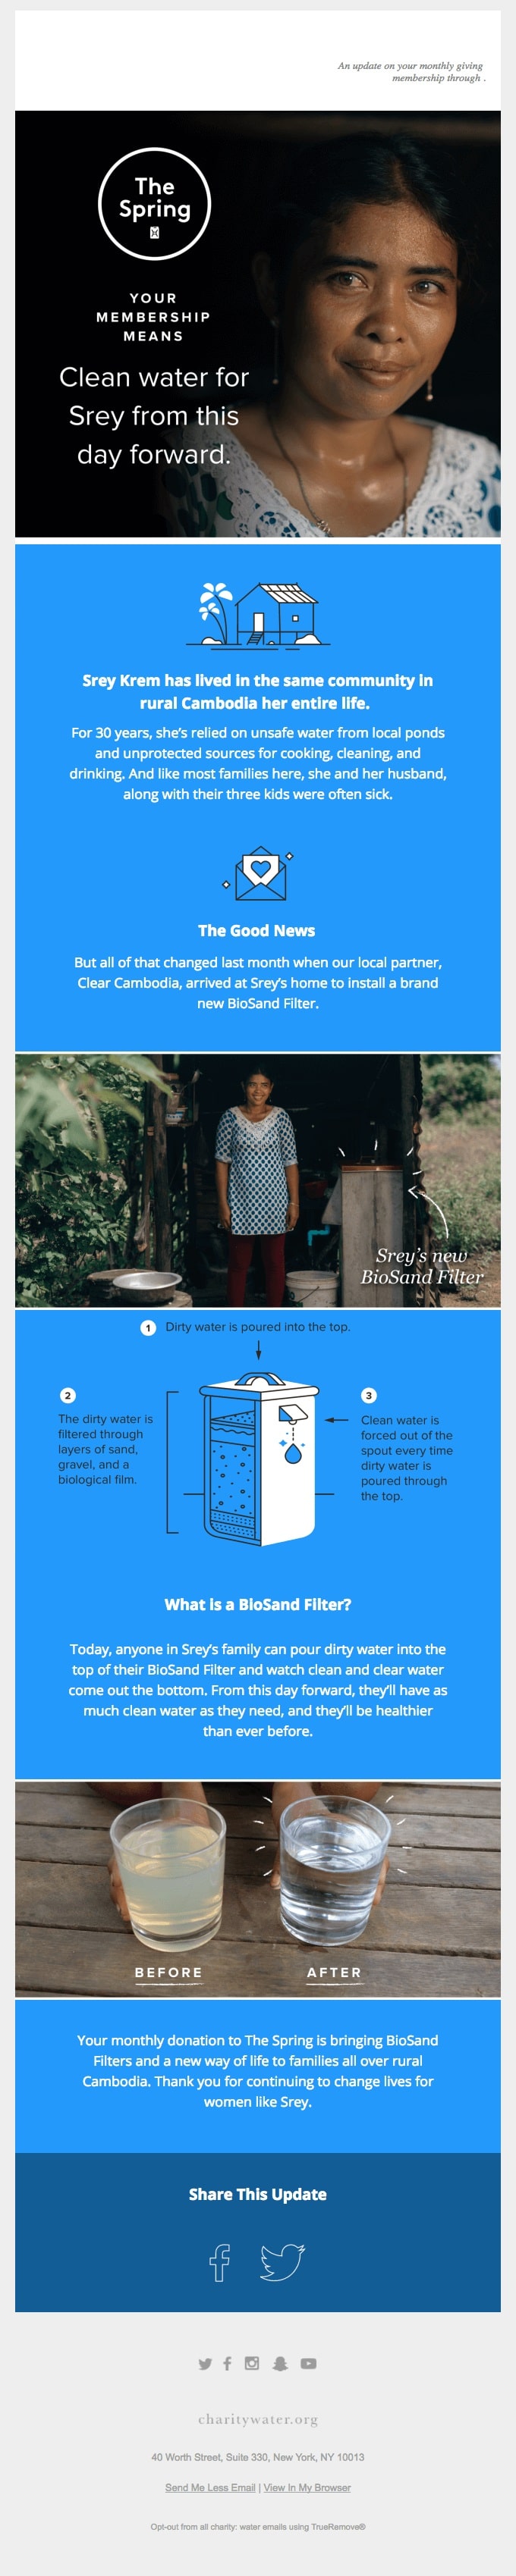 Nonprofit email from charity : water that focuses on a personal story